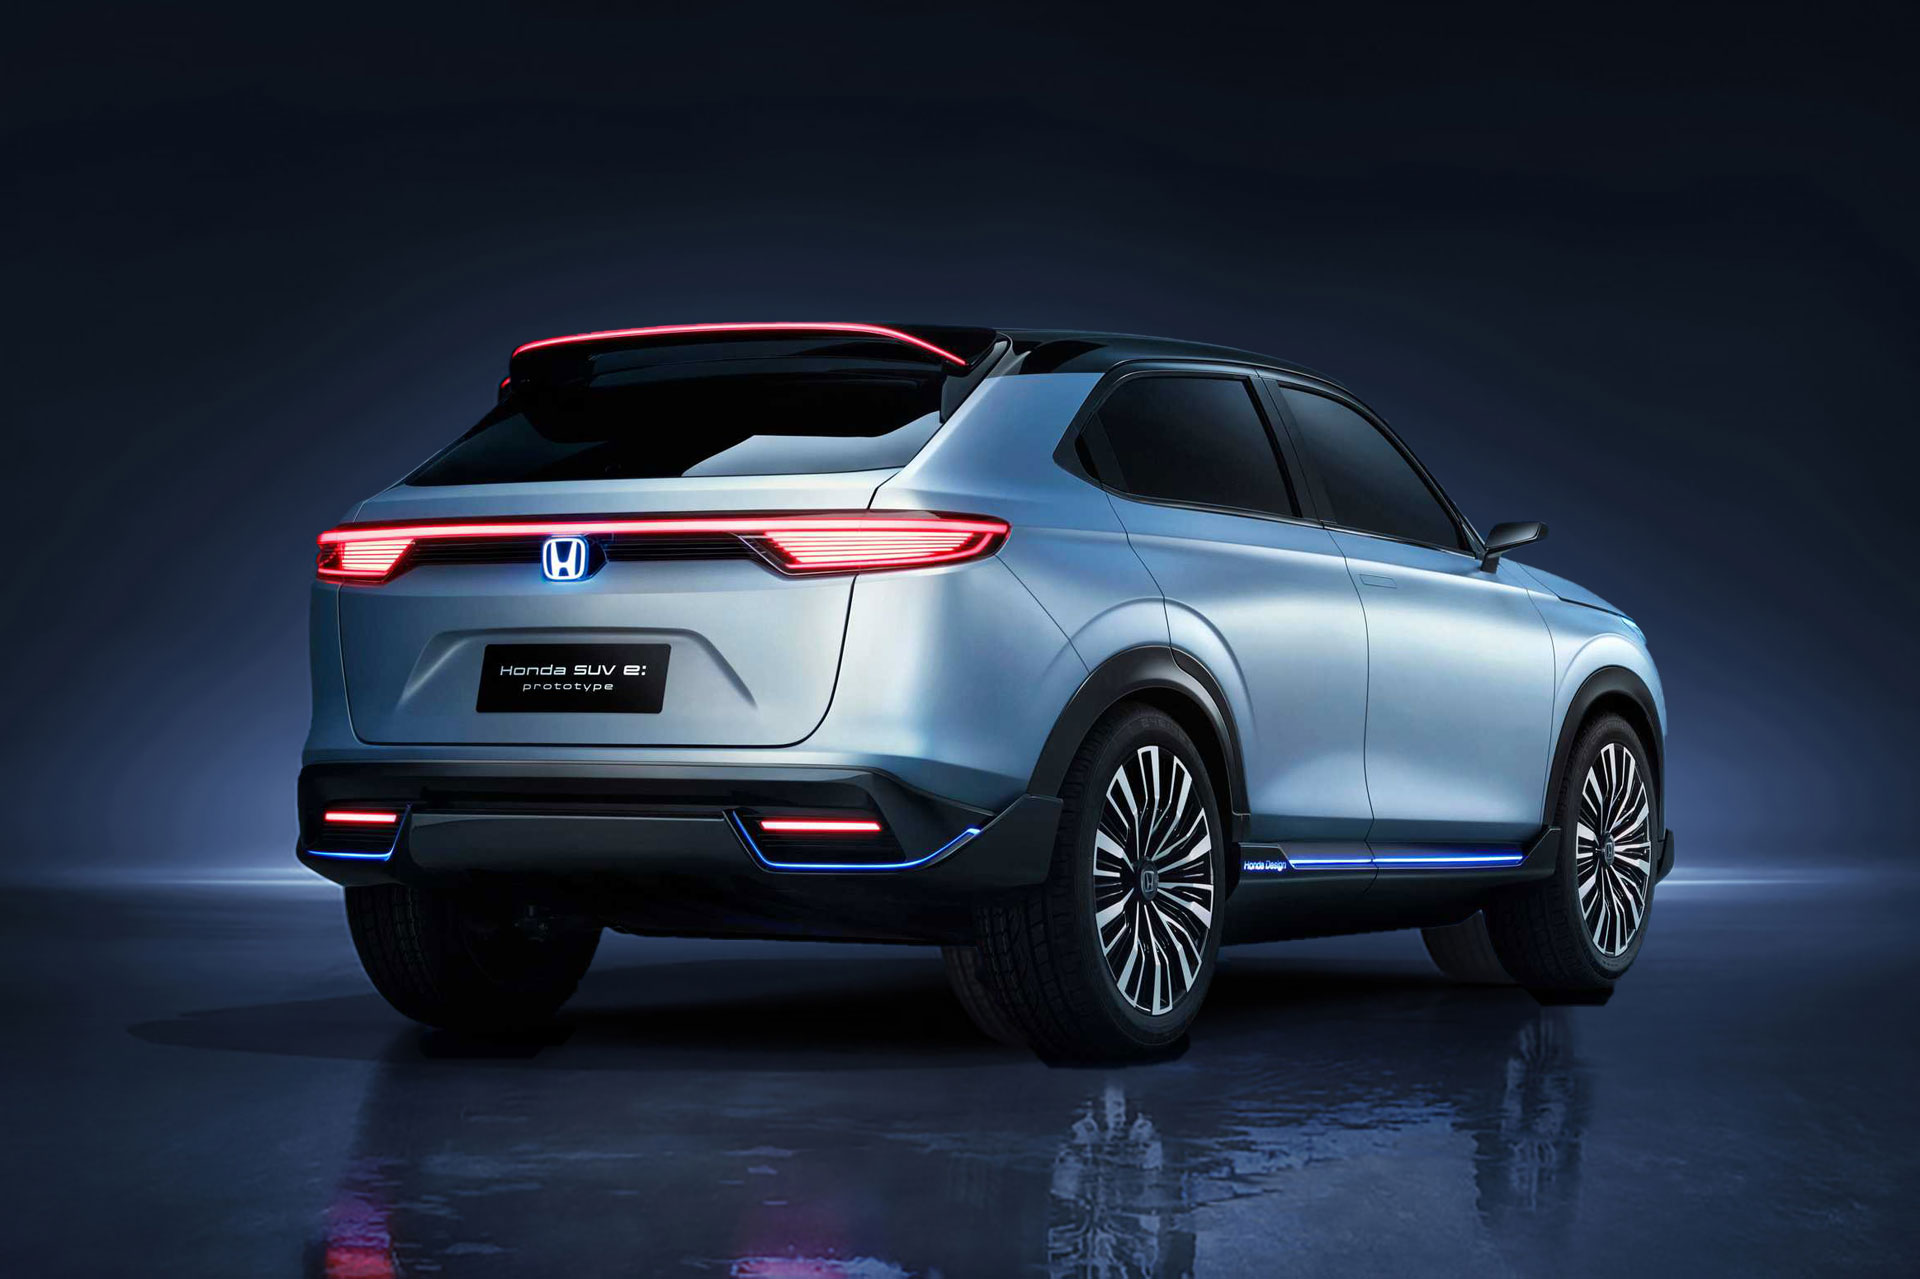 Honda Reveals Electric SUV Prototype in China, Looks Like the New HRV